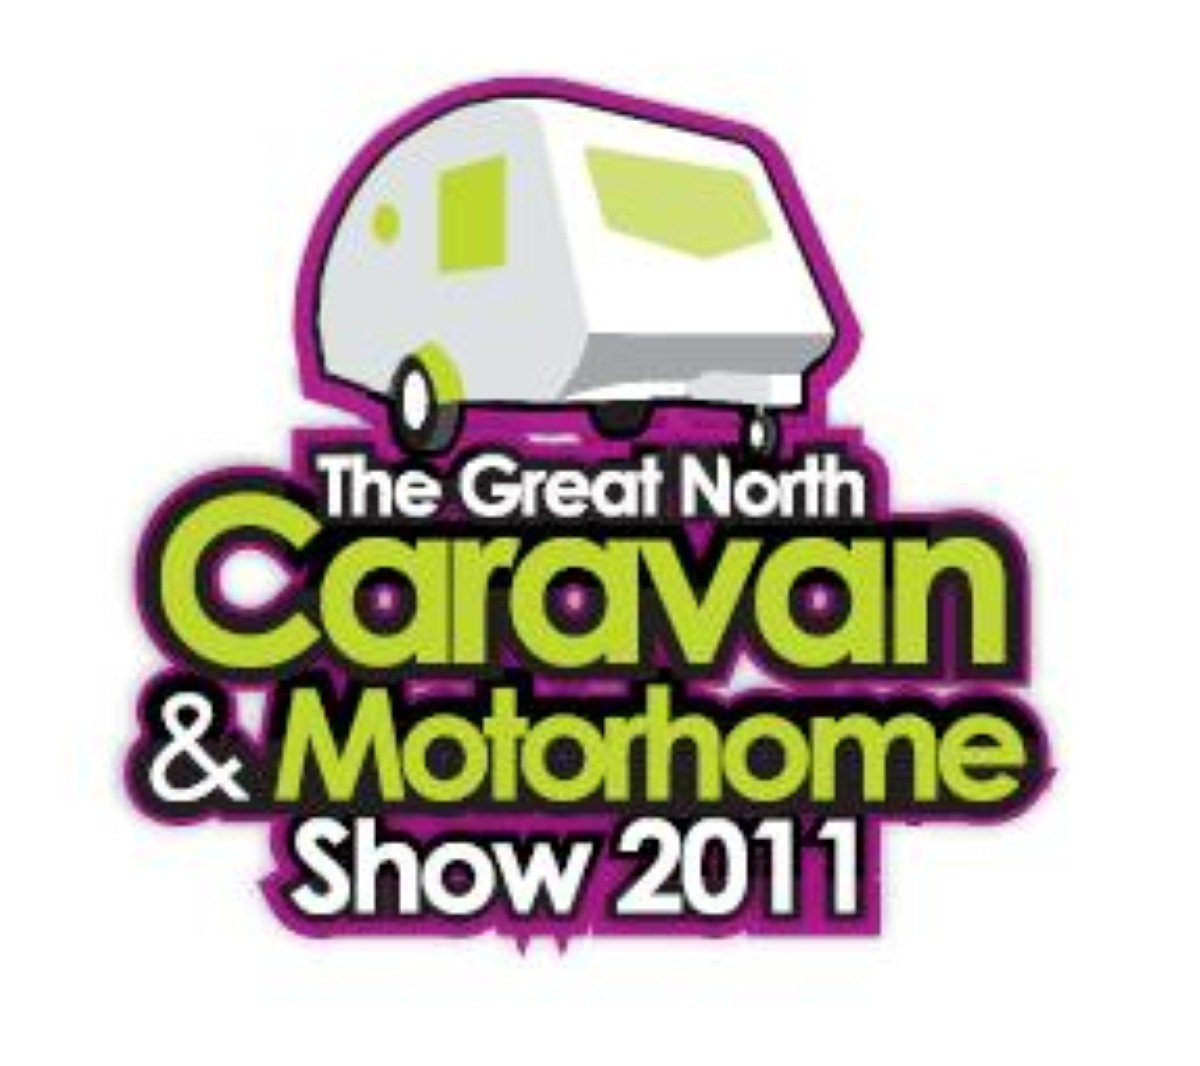 SHOW: Get free tickets to the Great North Caravan & Motorhome Show here